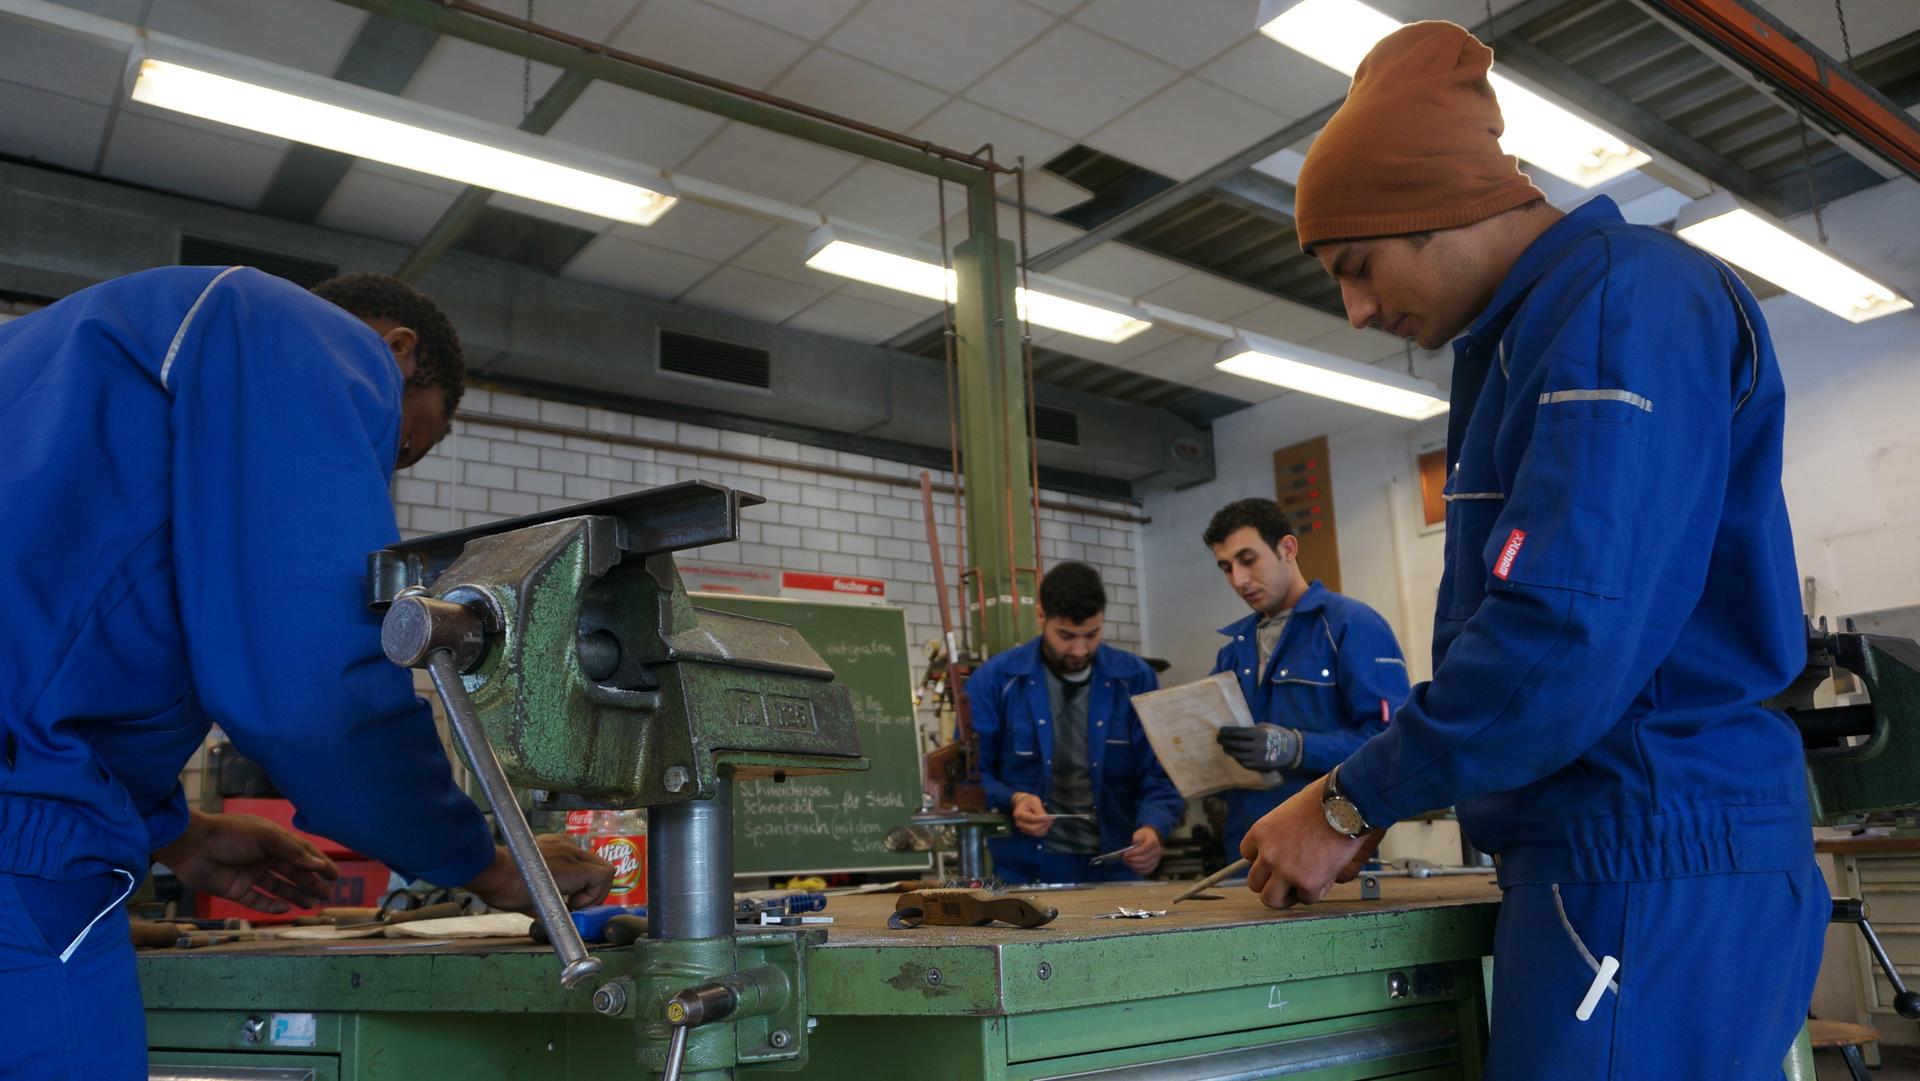 At the Cottbus Chamber of Crafts trainees enrolled in a refugee training program prepare for the day's metalworking assignment, in Cottbus, Brandenburg, Germany, Jan. 11, 2017.